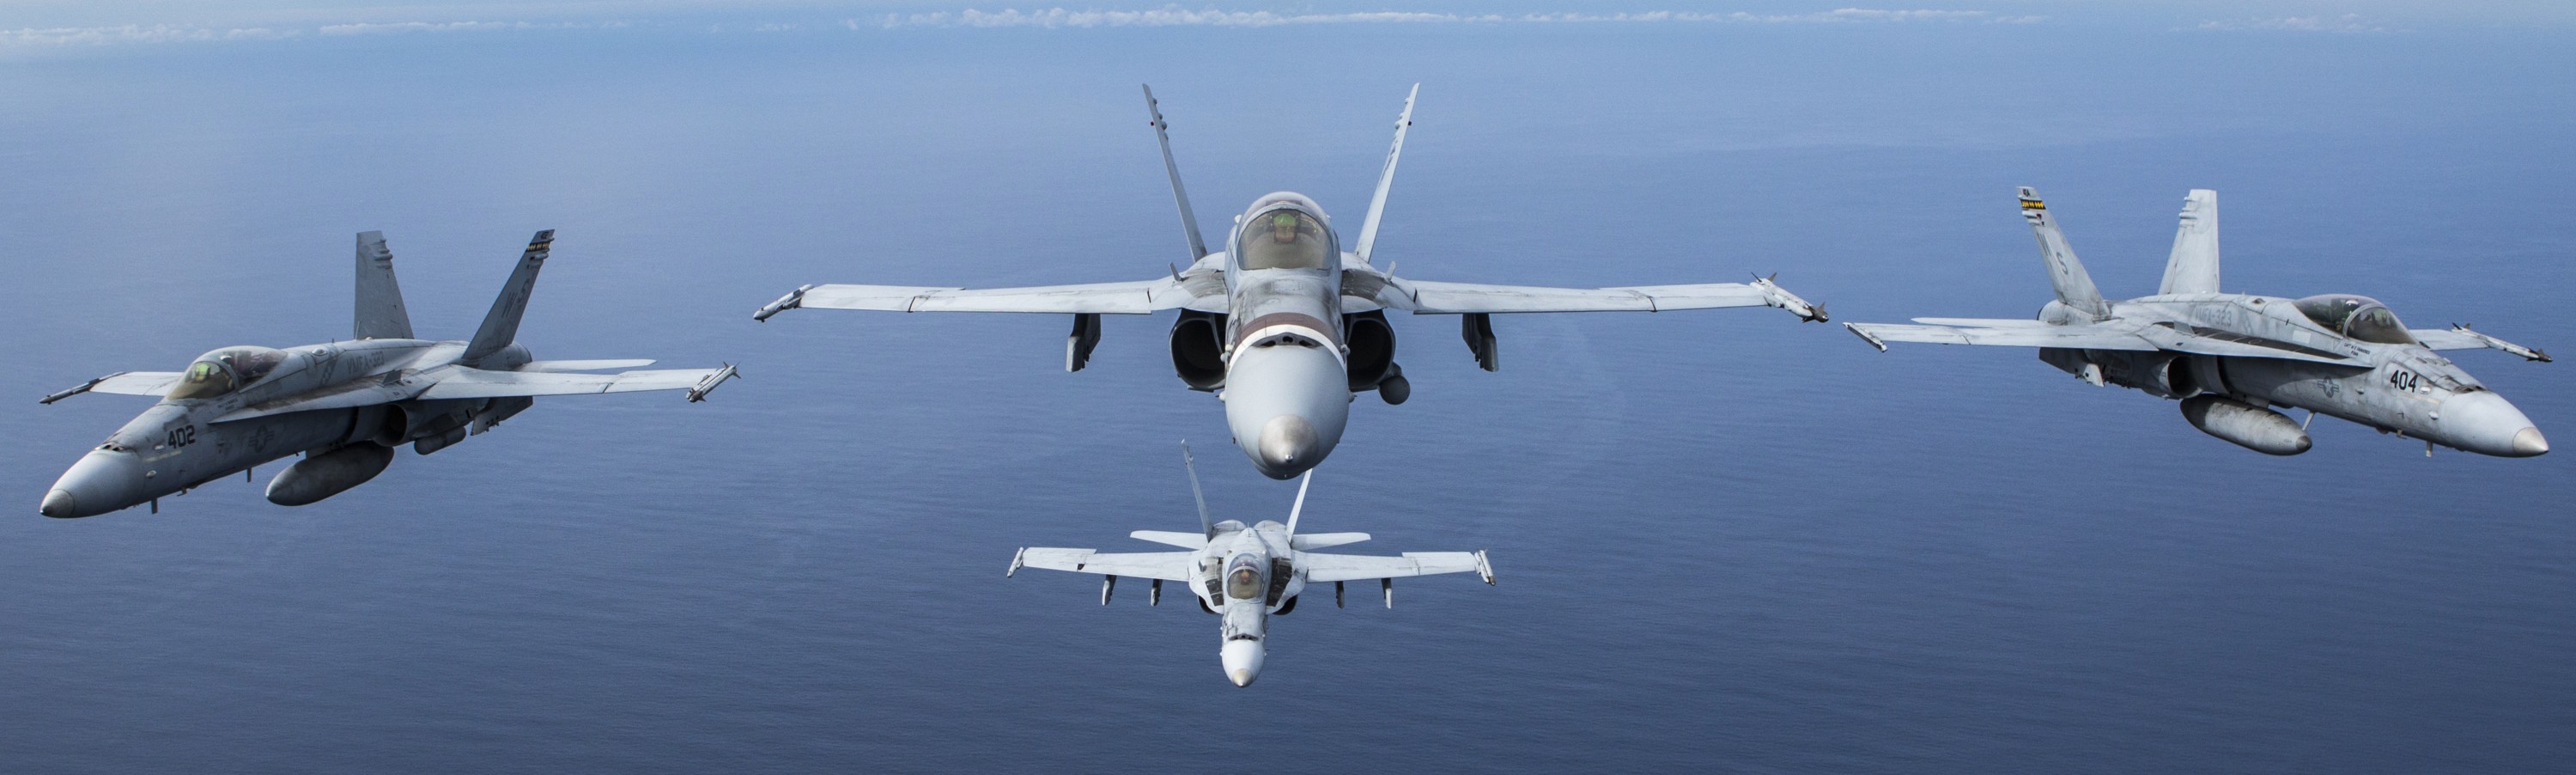 vmfa-323 death rattlers marine fighter attack squadron f/a-18c hornet 35